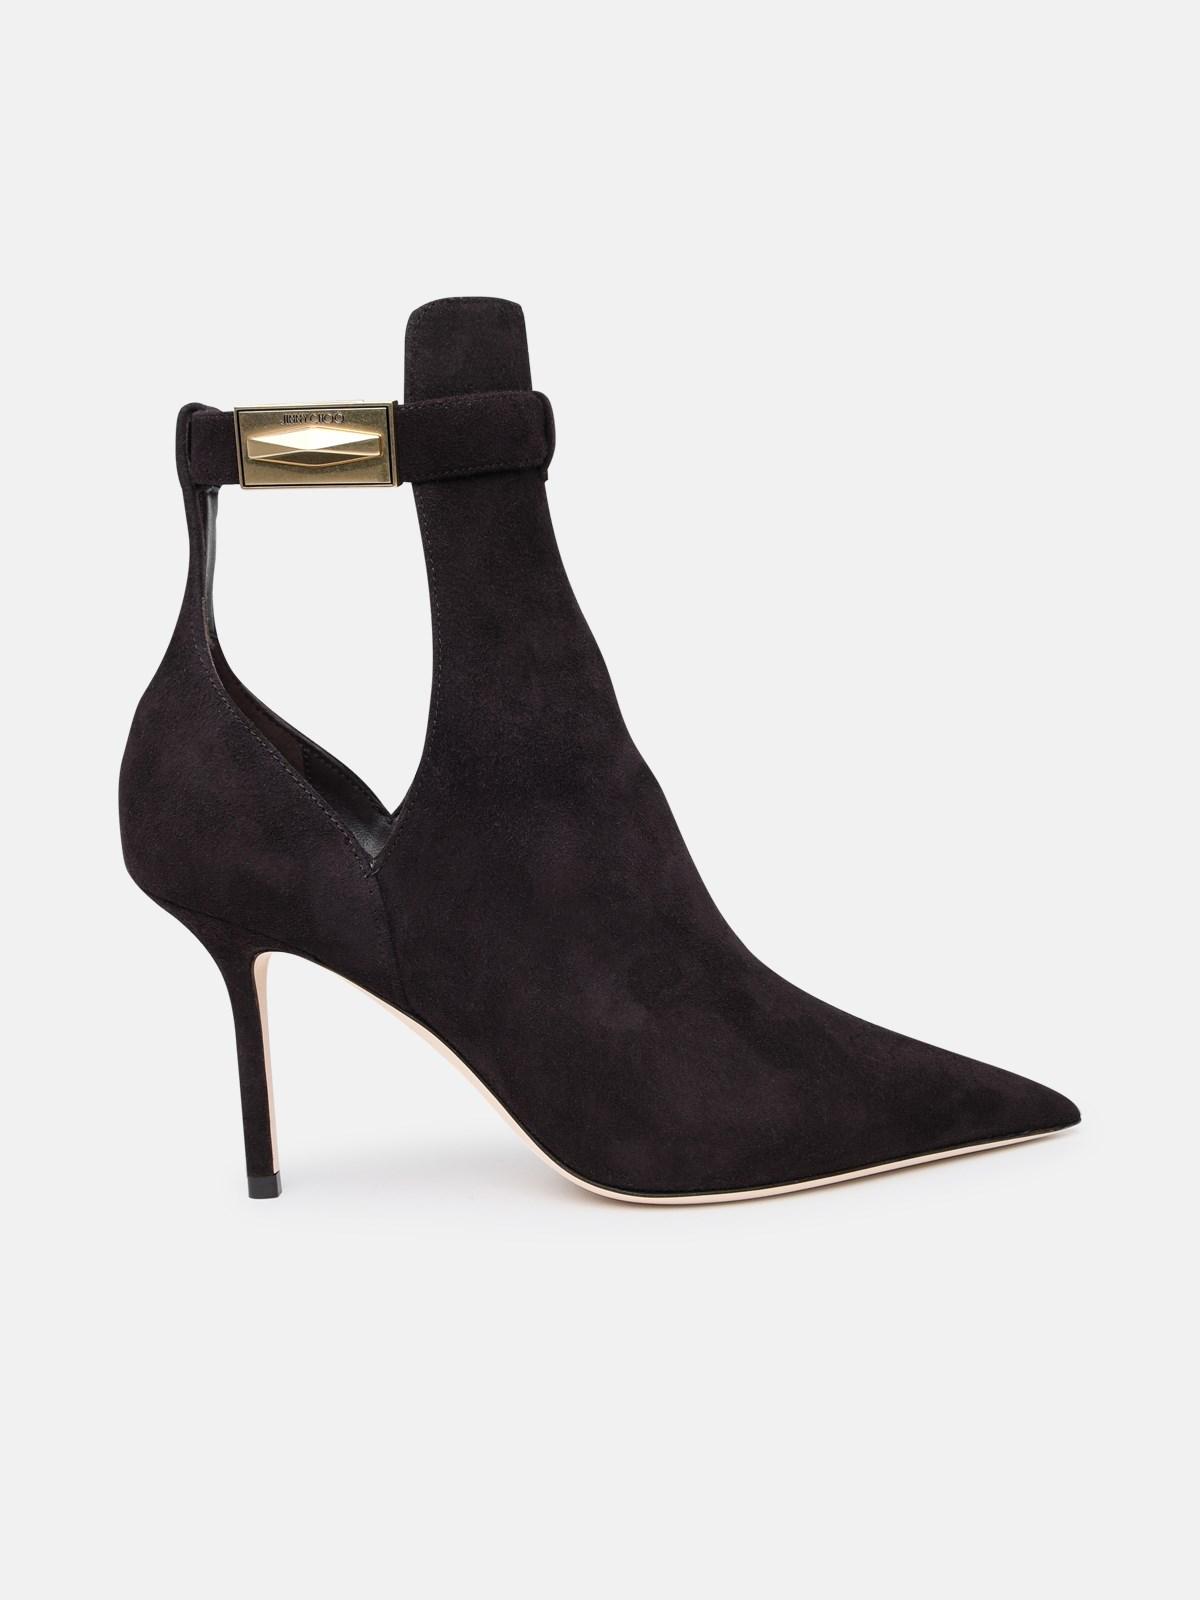 Jimmy Choo Nell Coffee Suede Ankle Boots in Black | Lyst